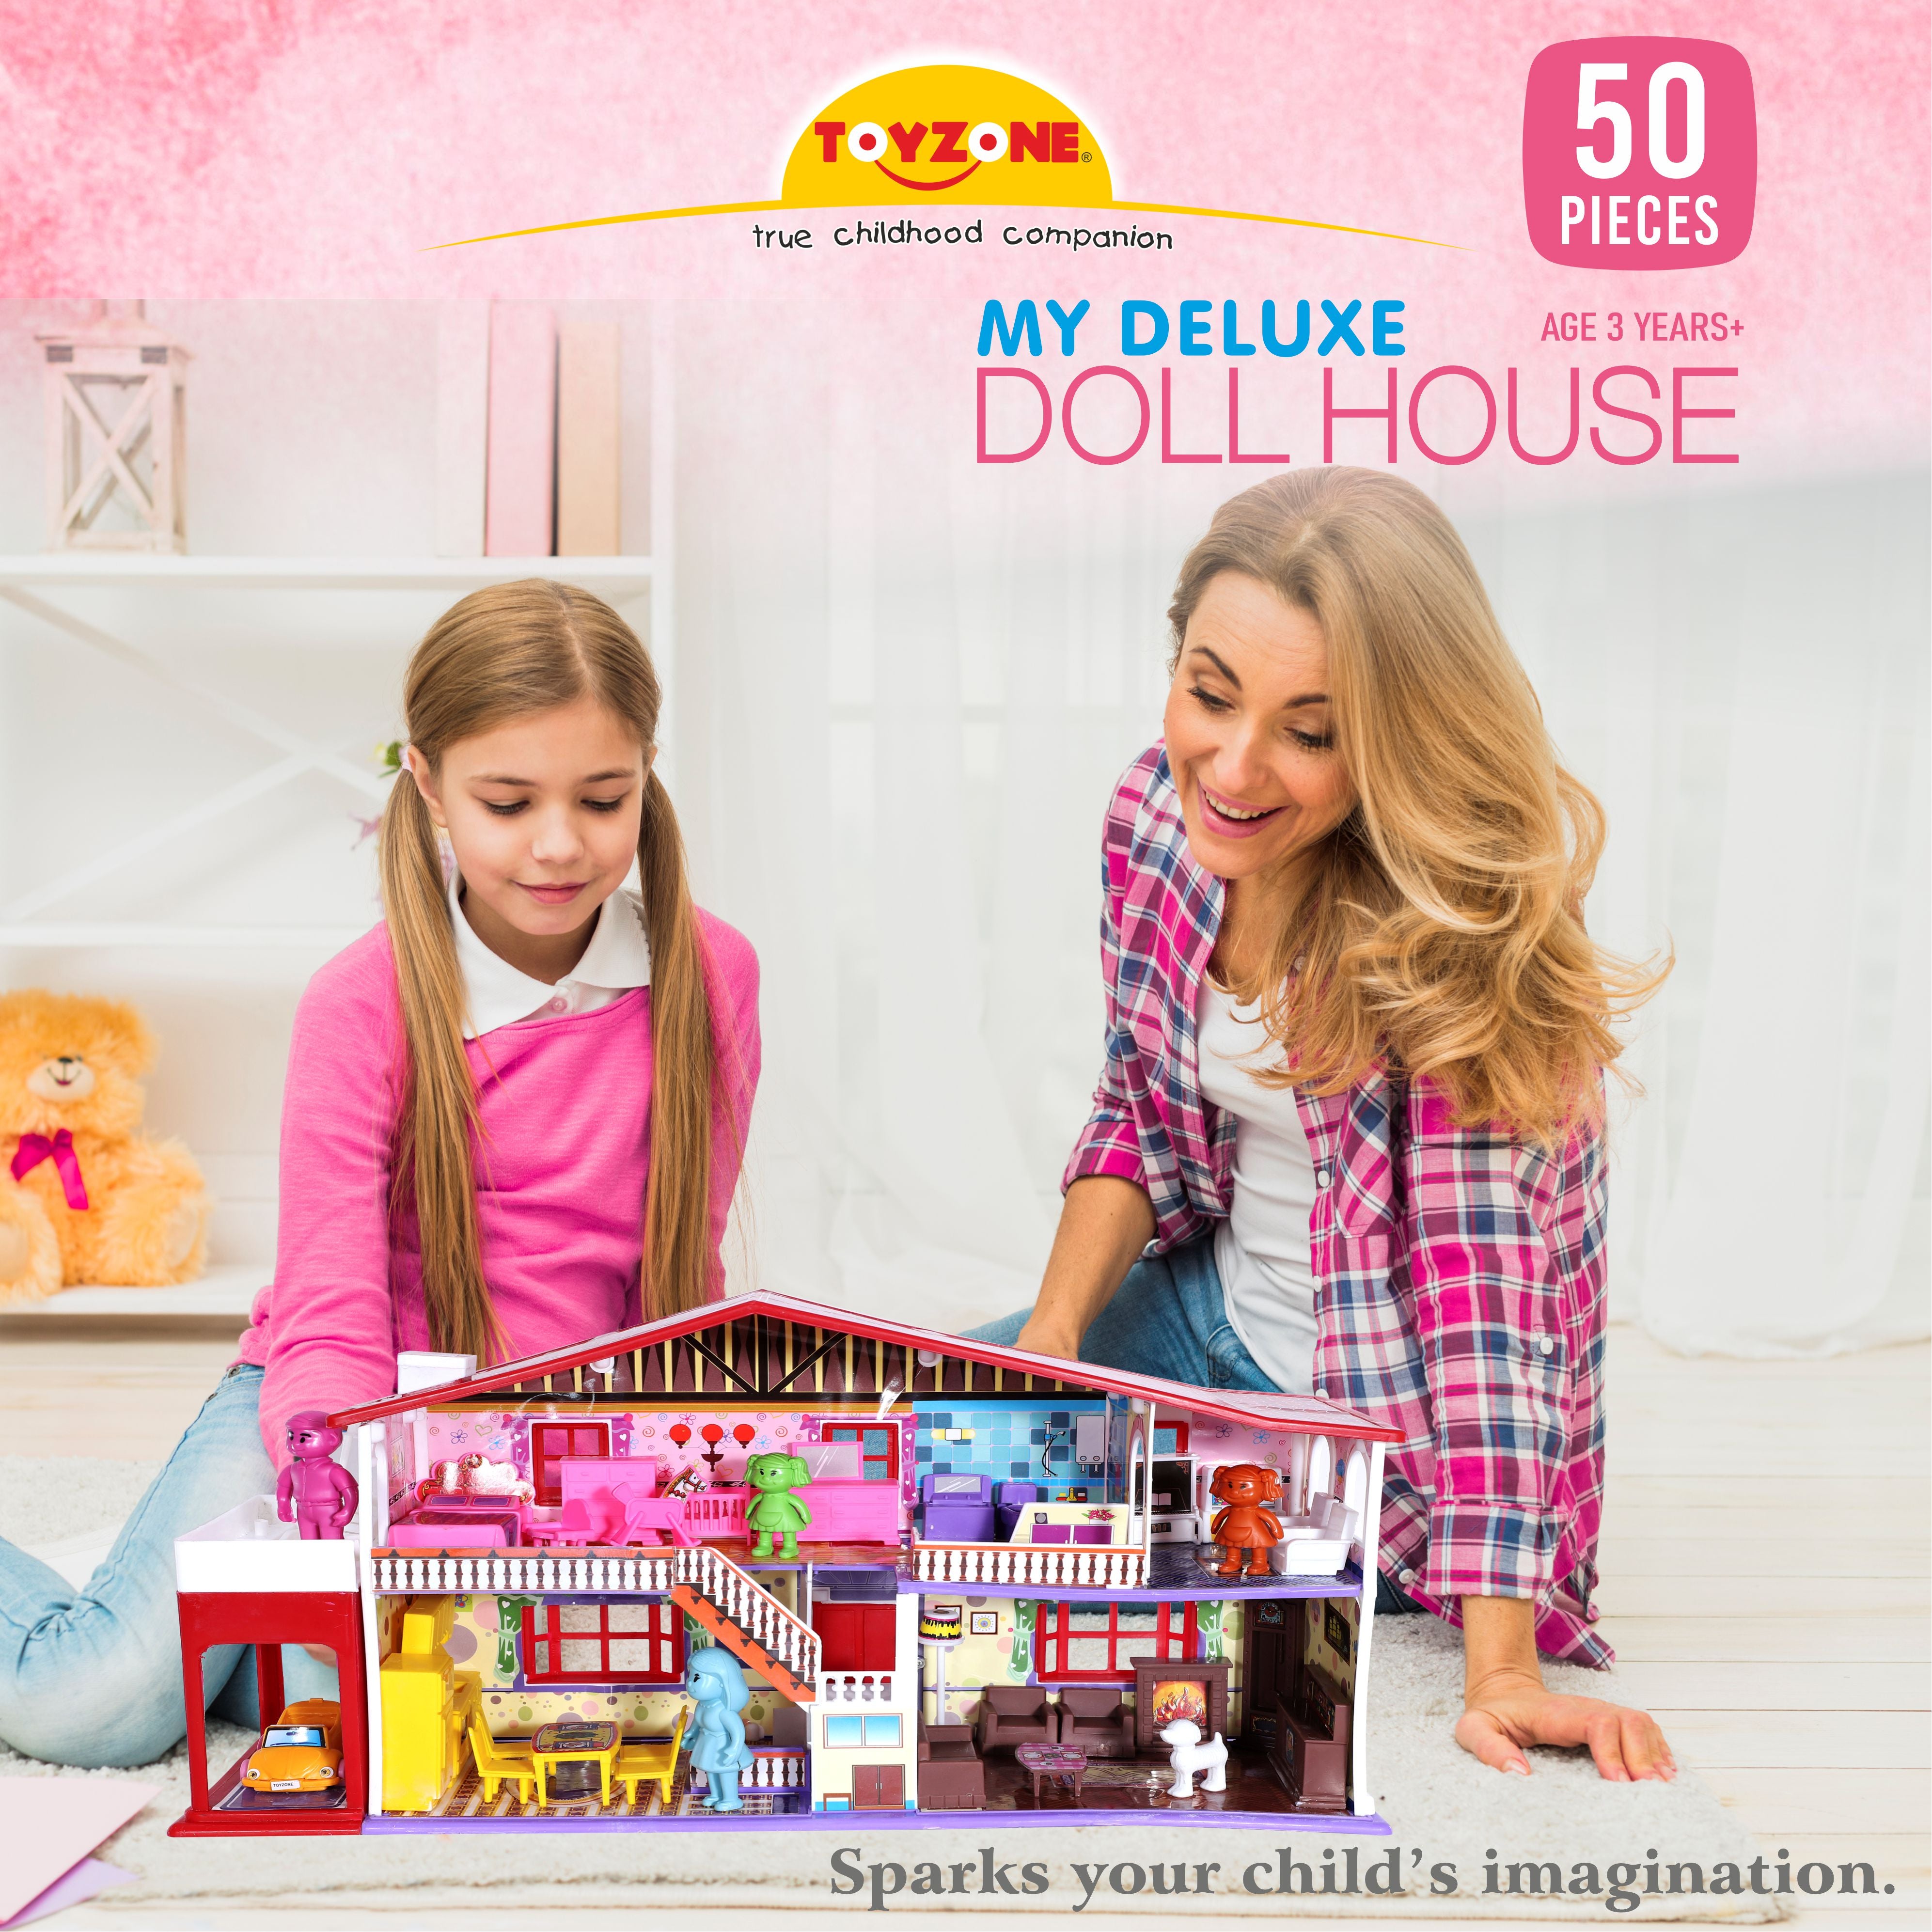 My Deluxe Doll House (50pcs)